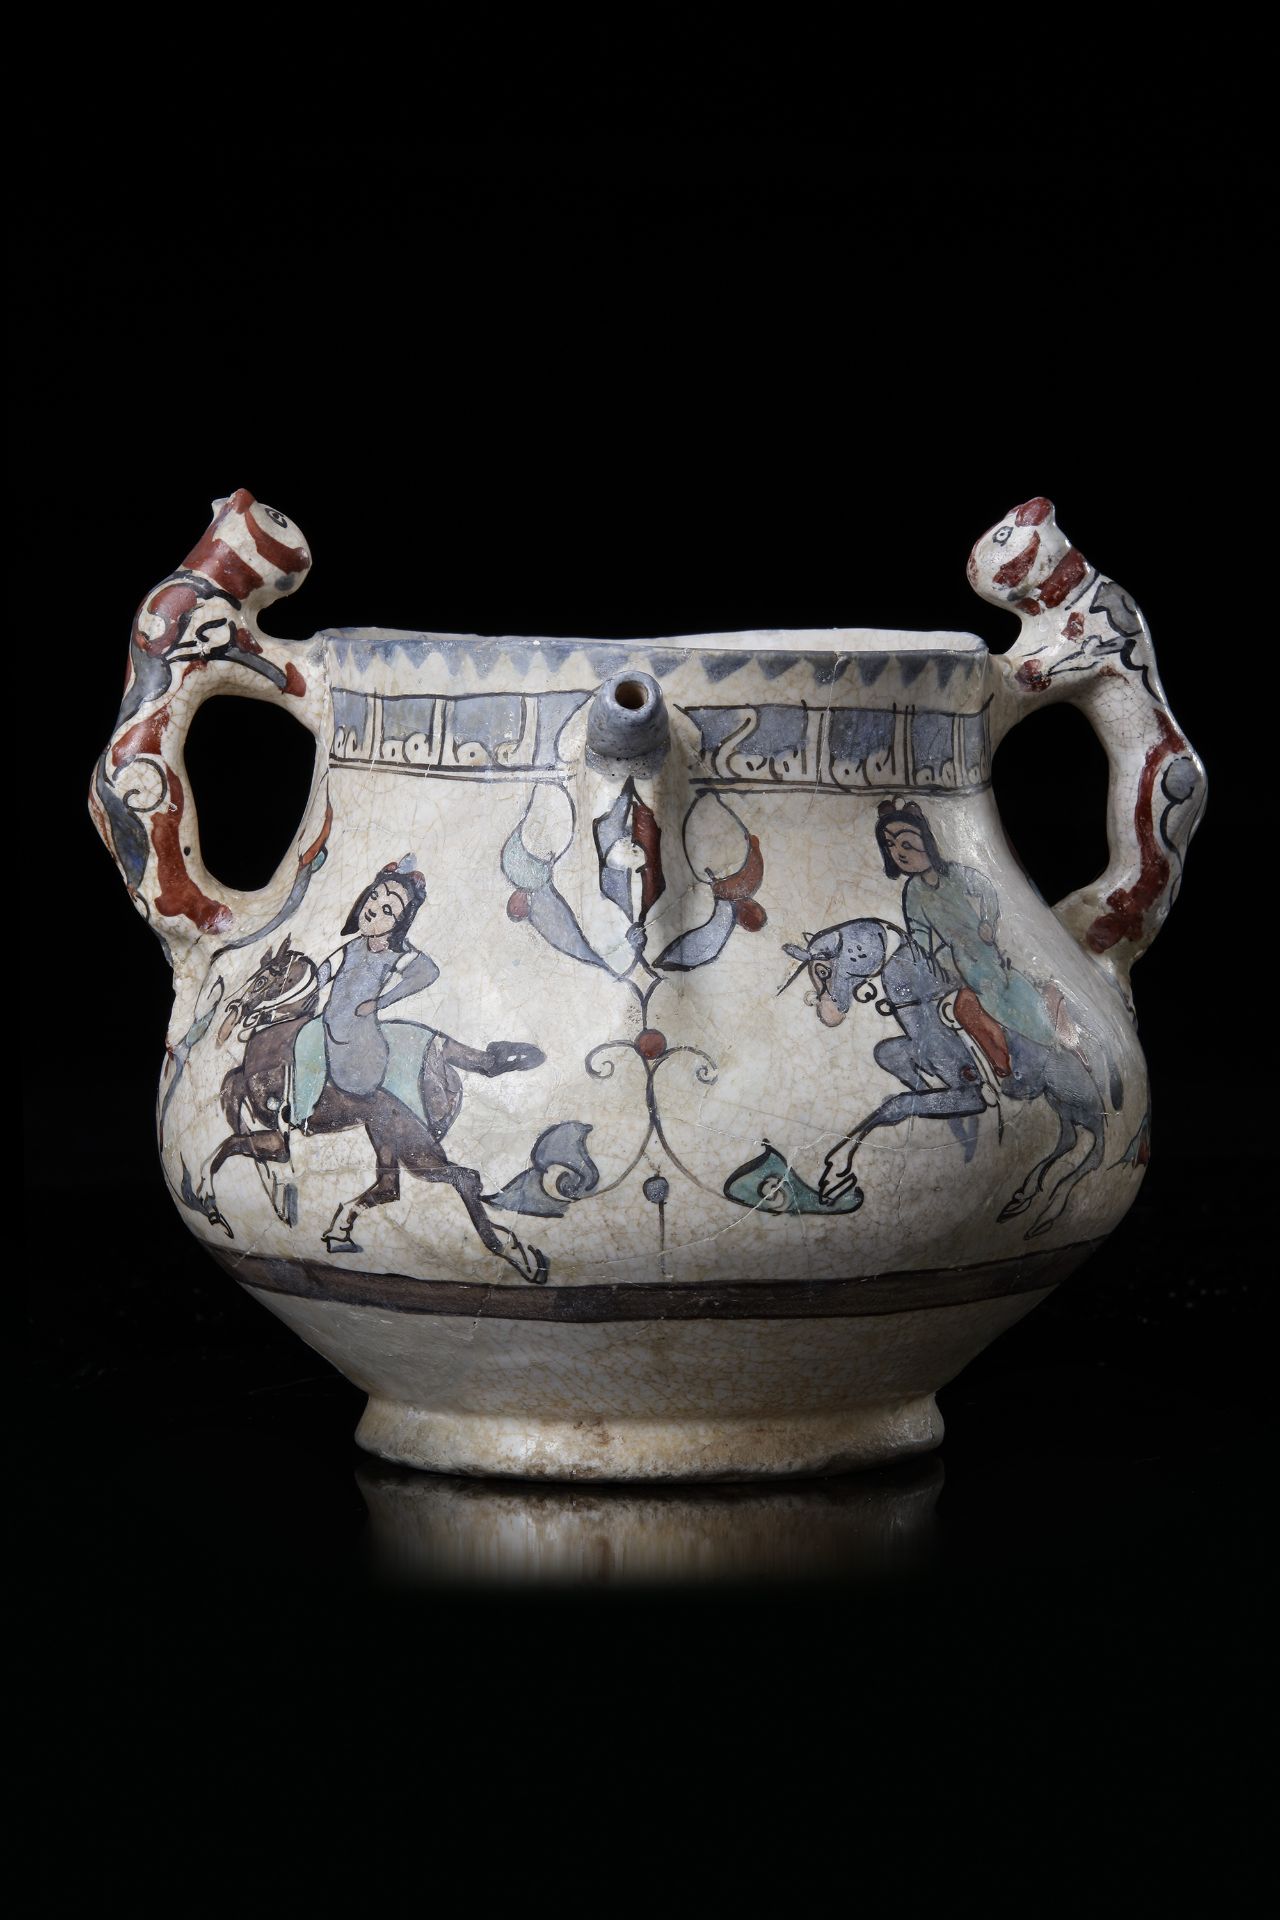 AN ISLAMIC VASE WITH ZOOMORPHIC HANDLES, PERSIA, KASHAN, LATE 12TH-EARLY 13TH CENTURY - Image 5 of 5